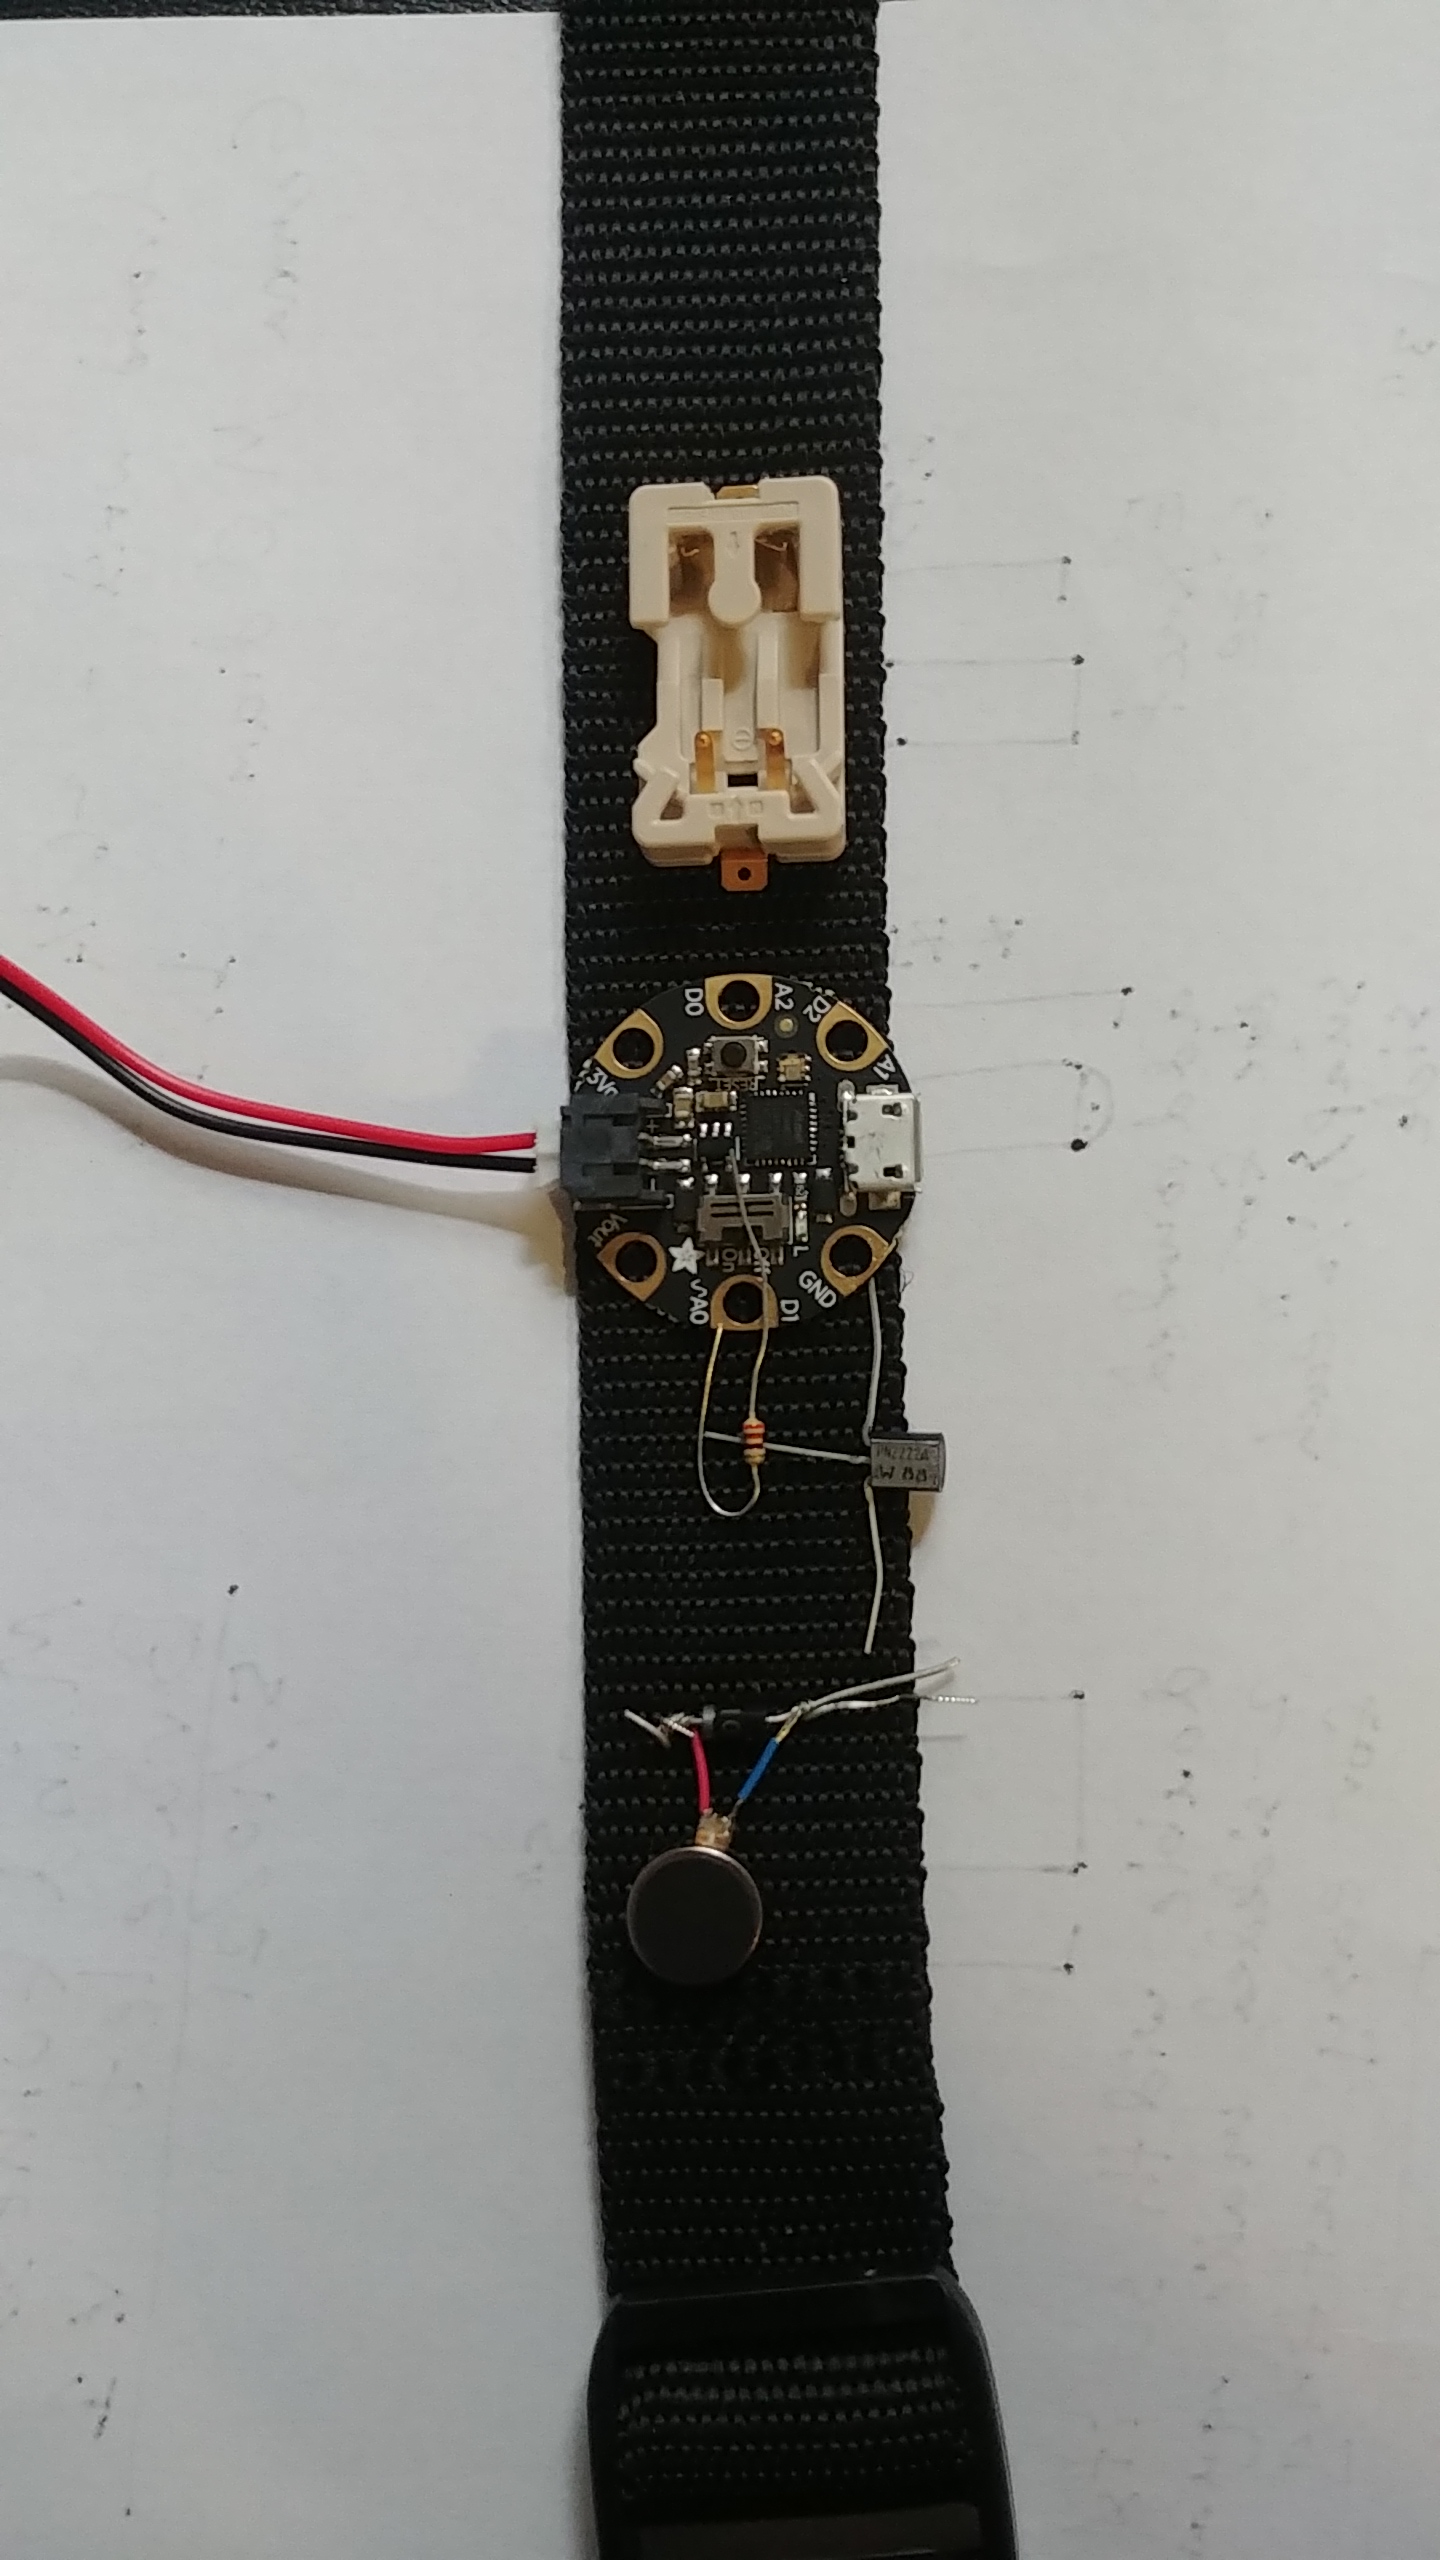 black nylon strap with gemma on it. The strap is on a table going up and down the frame. below the gemma is the vibration circuit, laid out but not connected